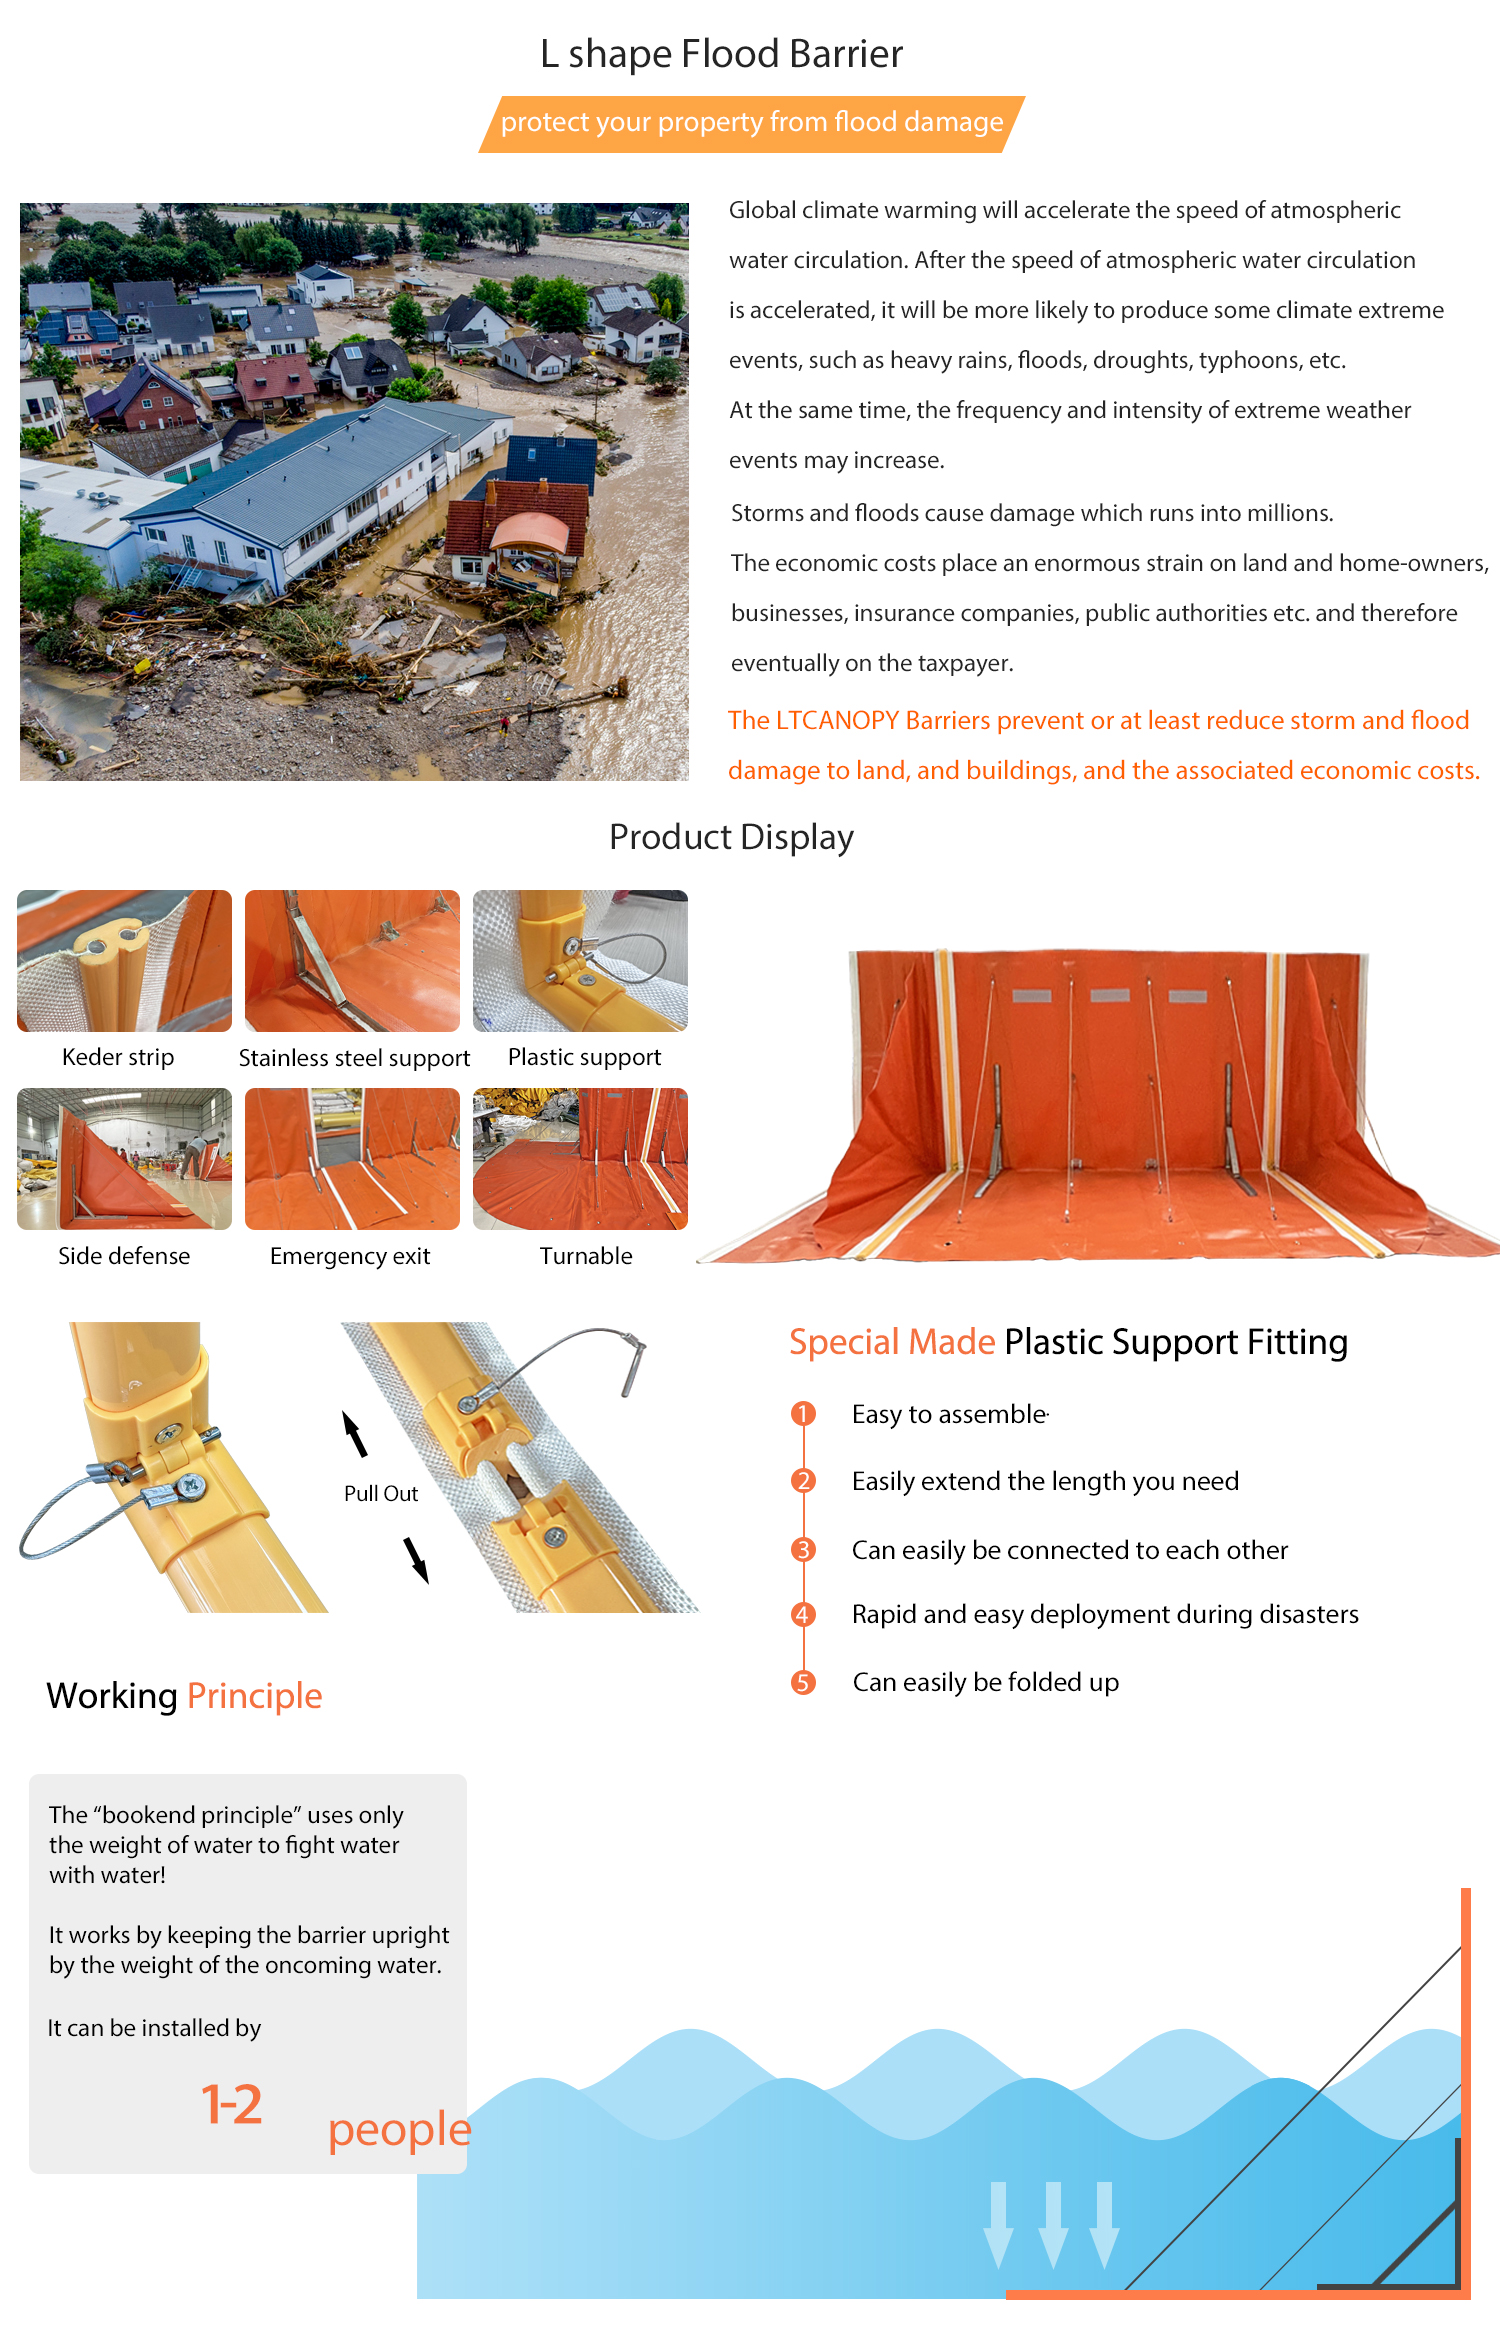 PVC flood barrier,flood protection barriers for homes,residential flood wall,self rising flood barrier,flood protection barriers